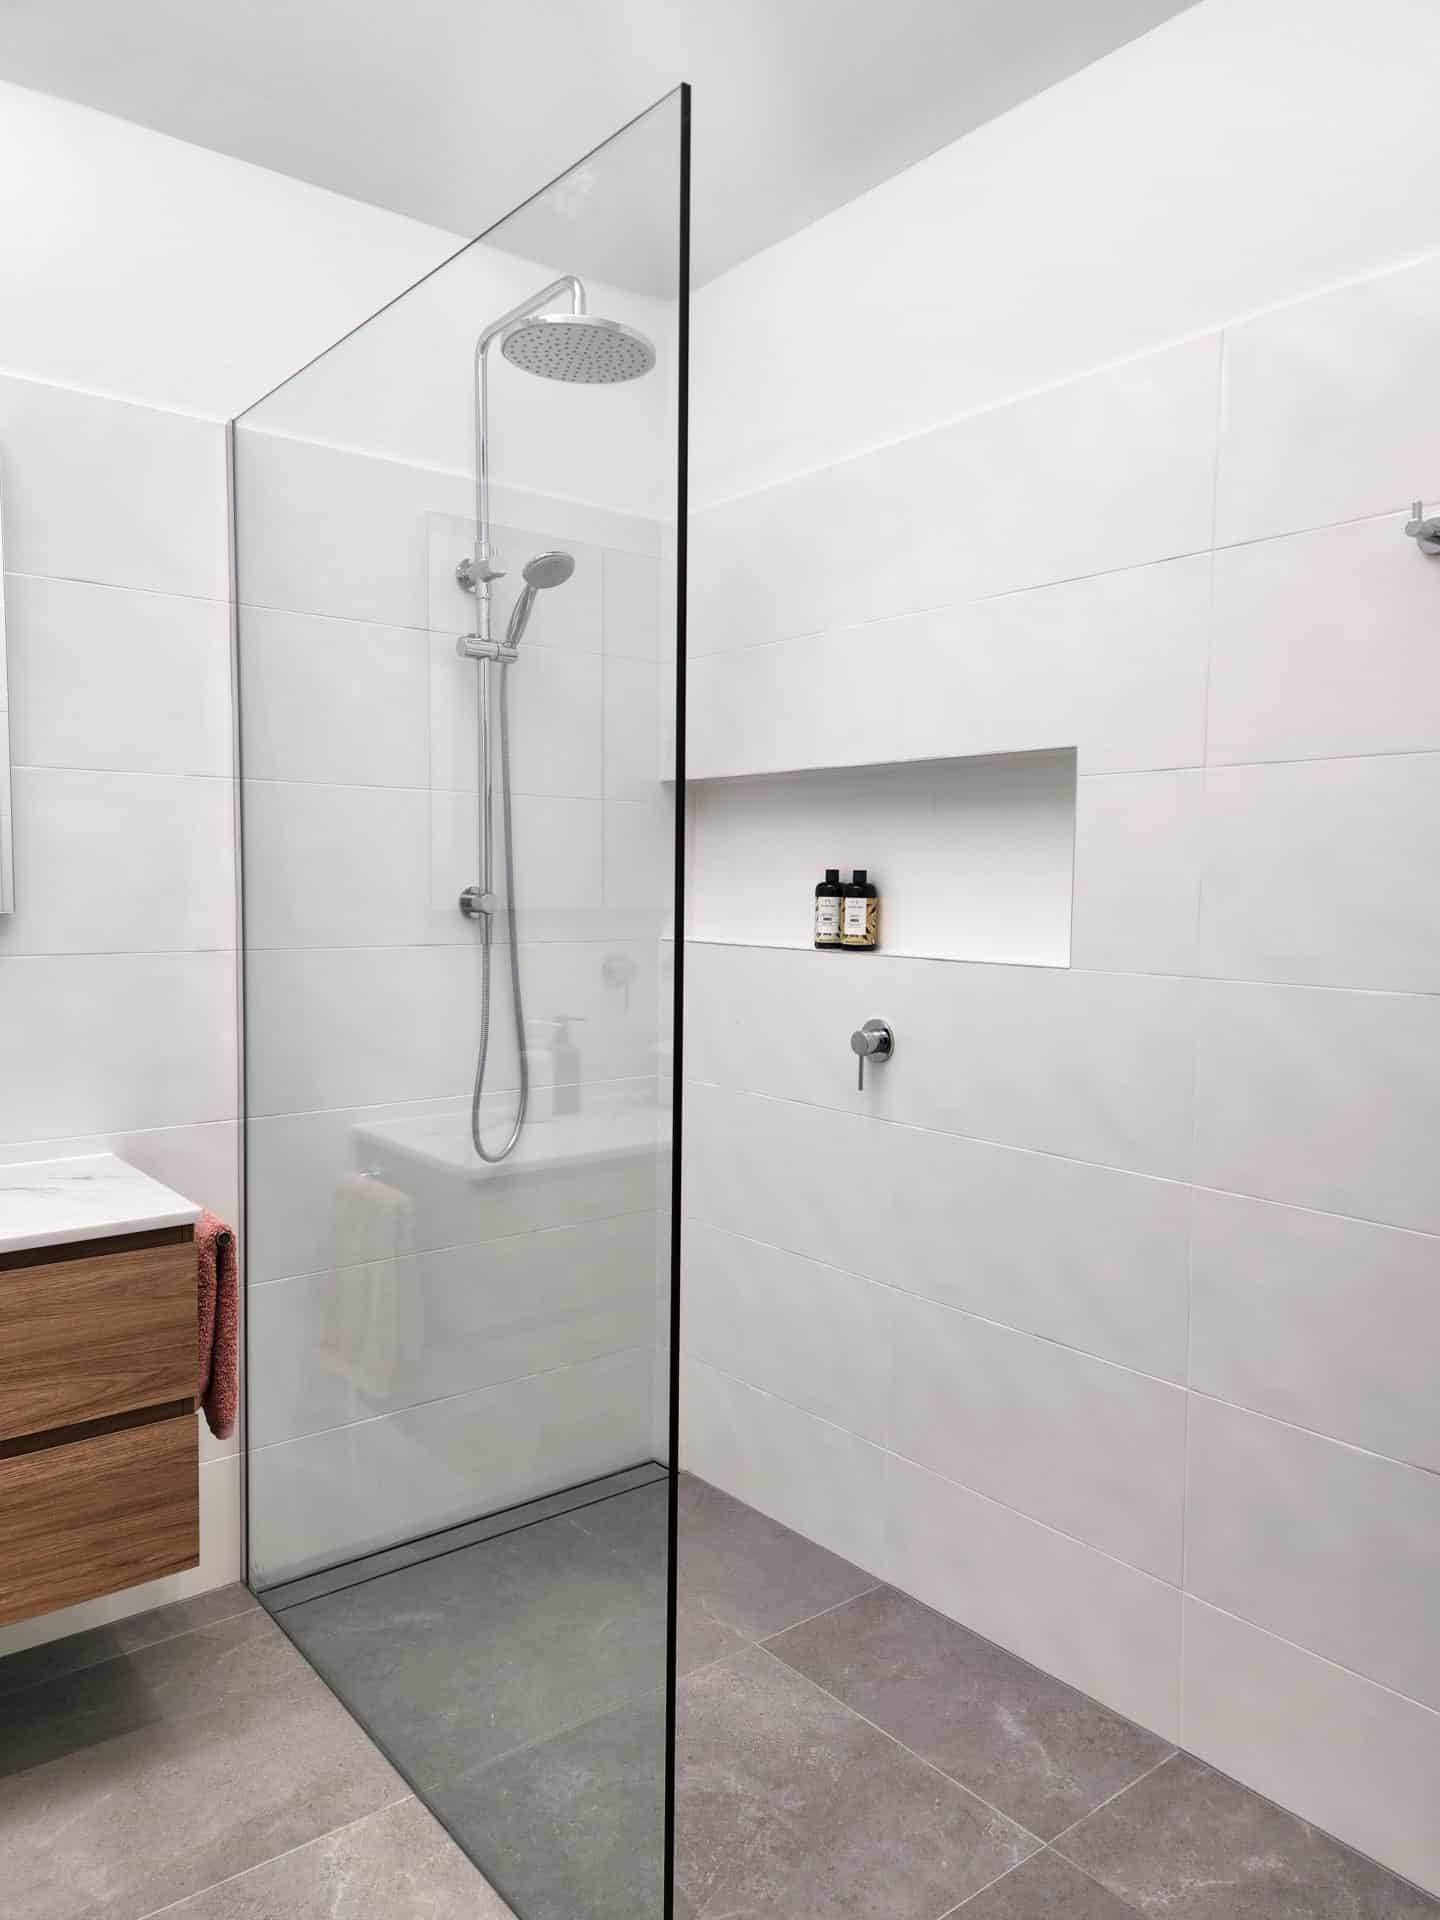 a modern bathroom with a glass shower stall.